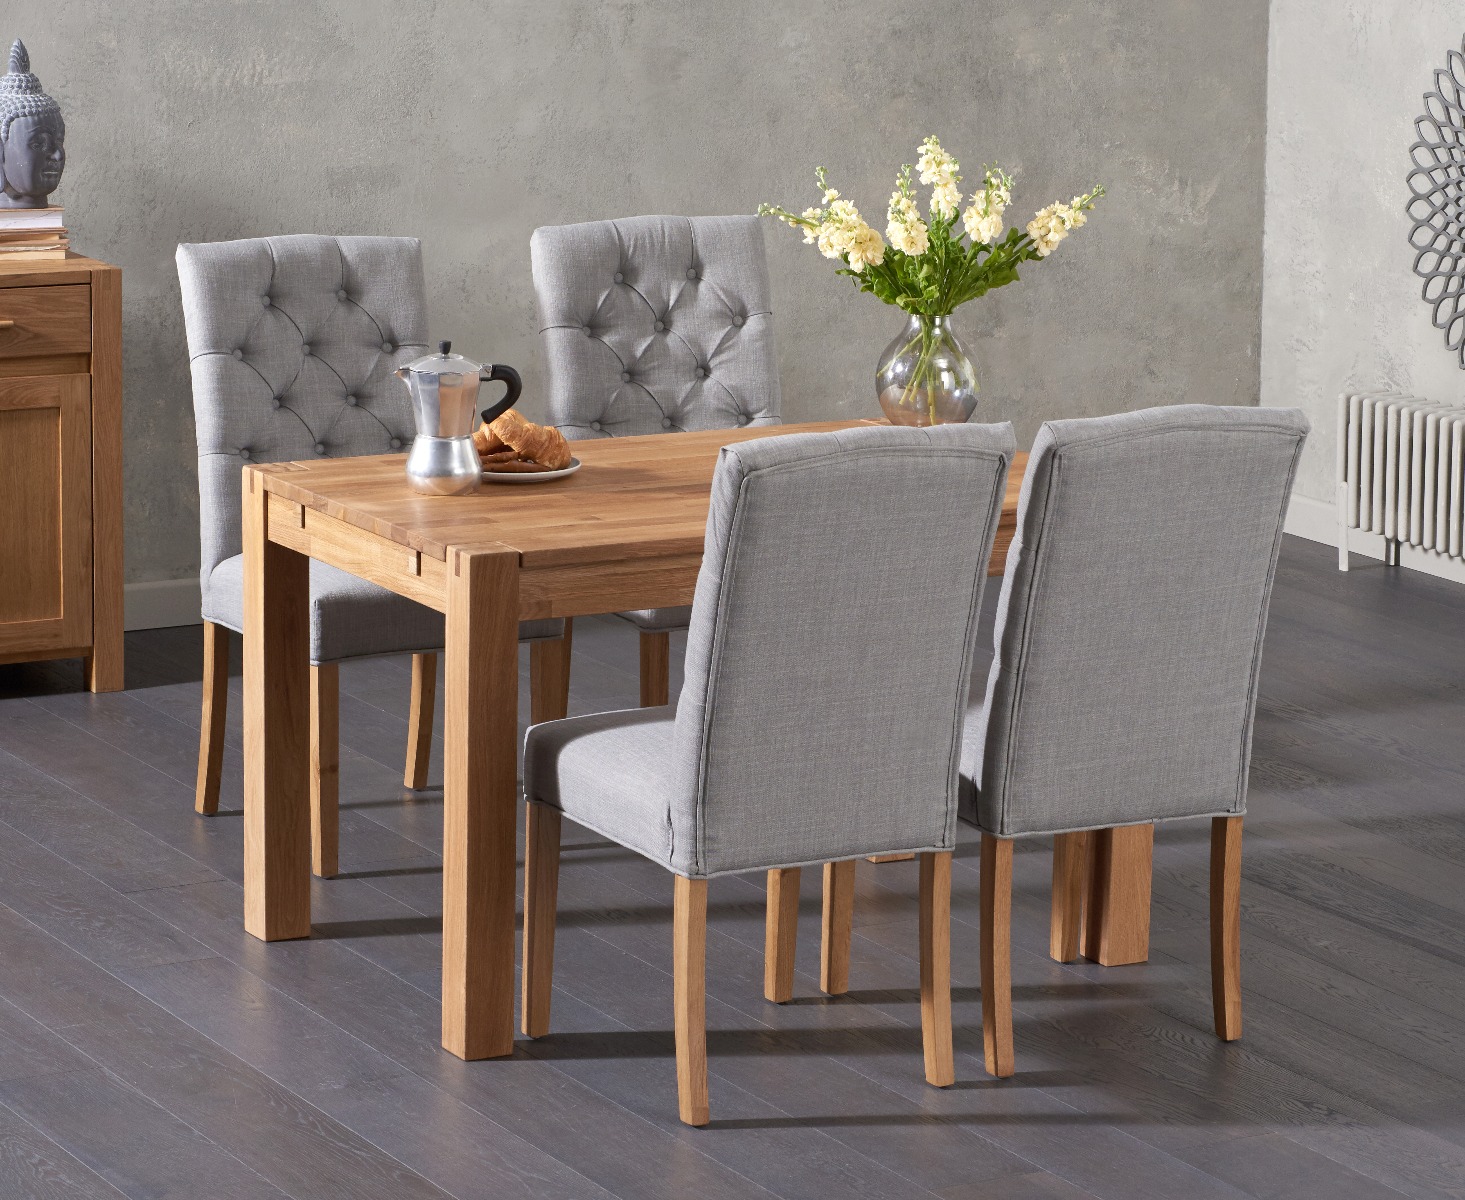 Verona 120cm Solid Oak Dining Table With 6 Cream Isabella Fabric Chairs